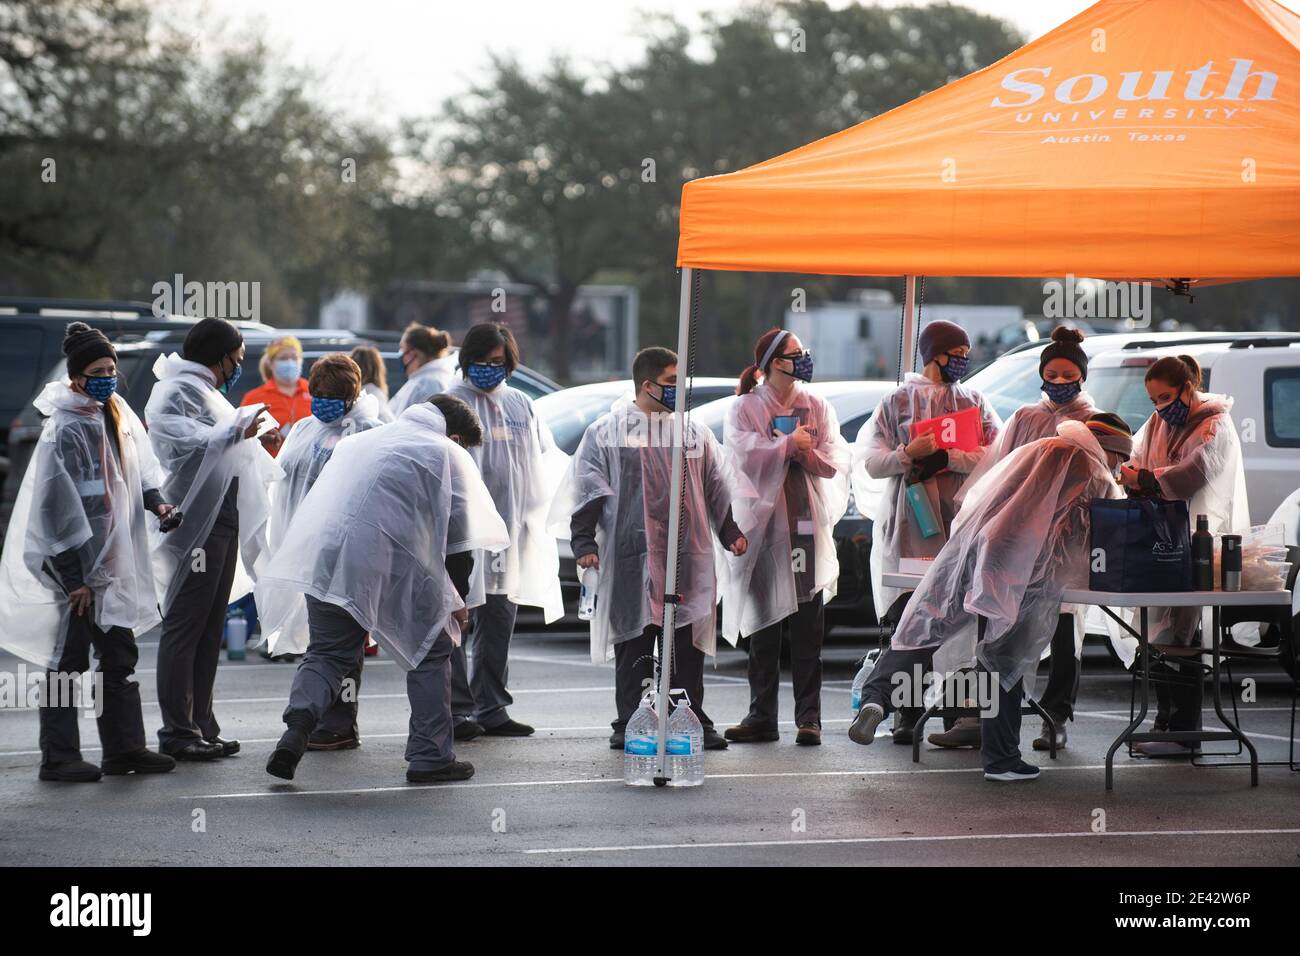 Round Rock, USA. 21st Jan, 2021: South University nursing students dressed in personal protective equipment prepare to administer Moderna COVID-19 vaccine to central Texas lined up at a drive-through clinic. More than 2,000 doses were given at the clinic the previous day as Texas ramps up its vaccine response. Credit: Bob Daemmrich/Alamy Live News Stock Photo